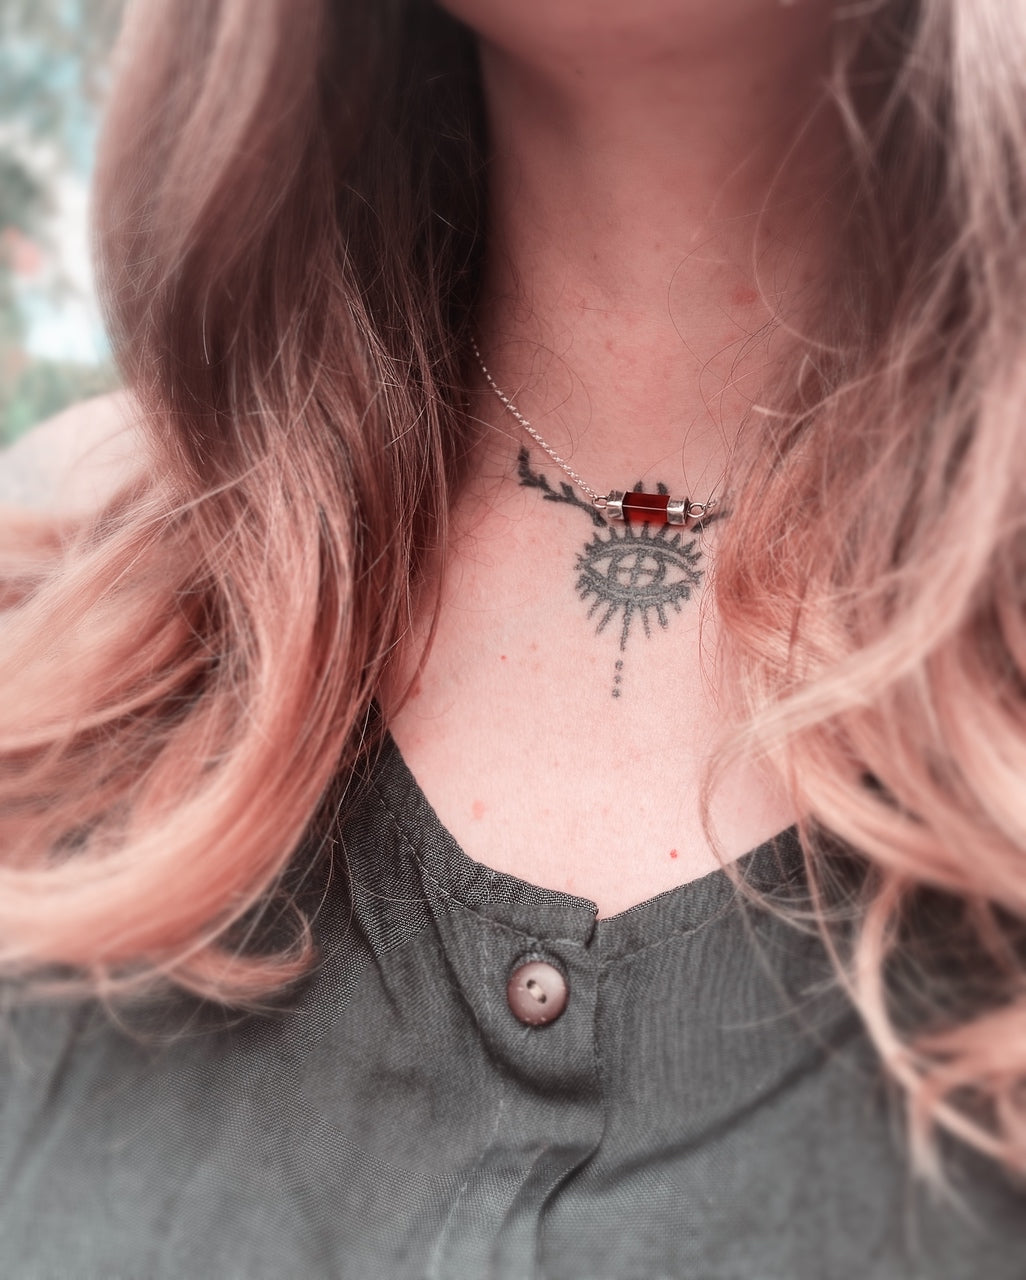 🔥EMBERS🔥Handmade Sterling Silver Choker Necklace with Carnelian